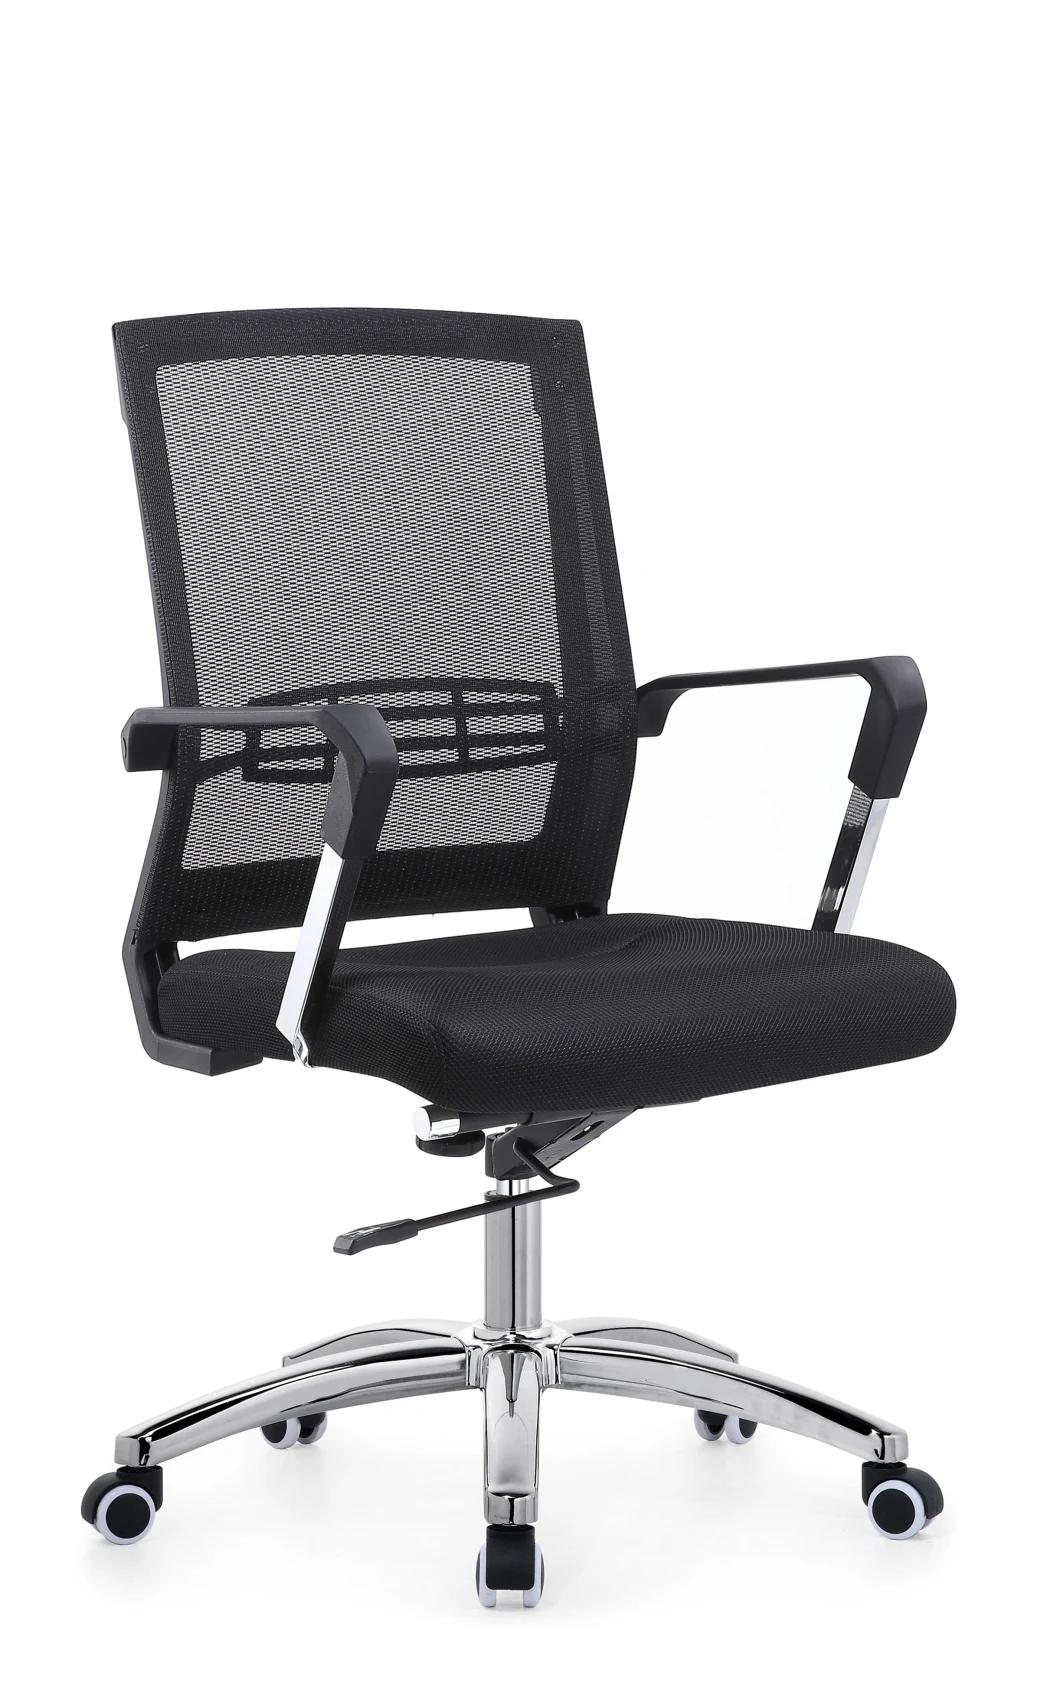 Excellent Executive Mesh Chair, Comfortable Office Chair-5118b